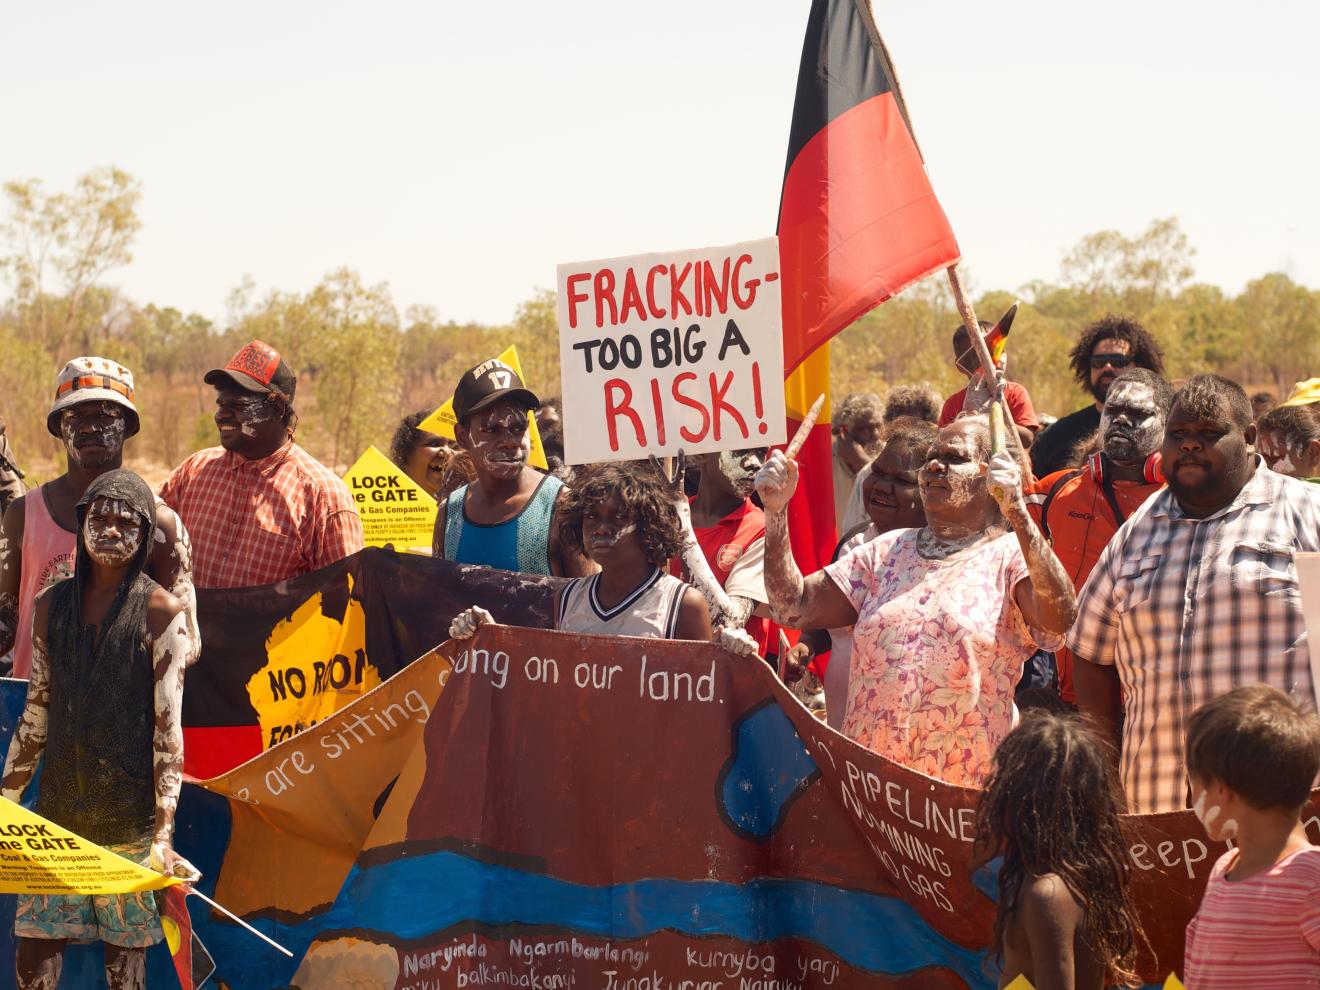 A group of Indigenous people asserting sovereignty over their lands and contesting unwanted and destructive development